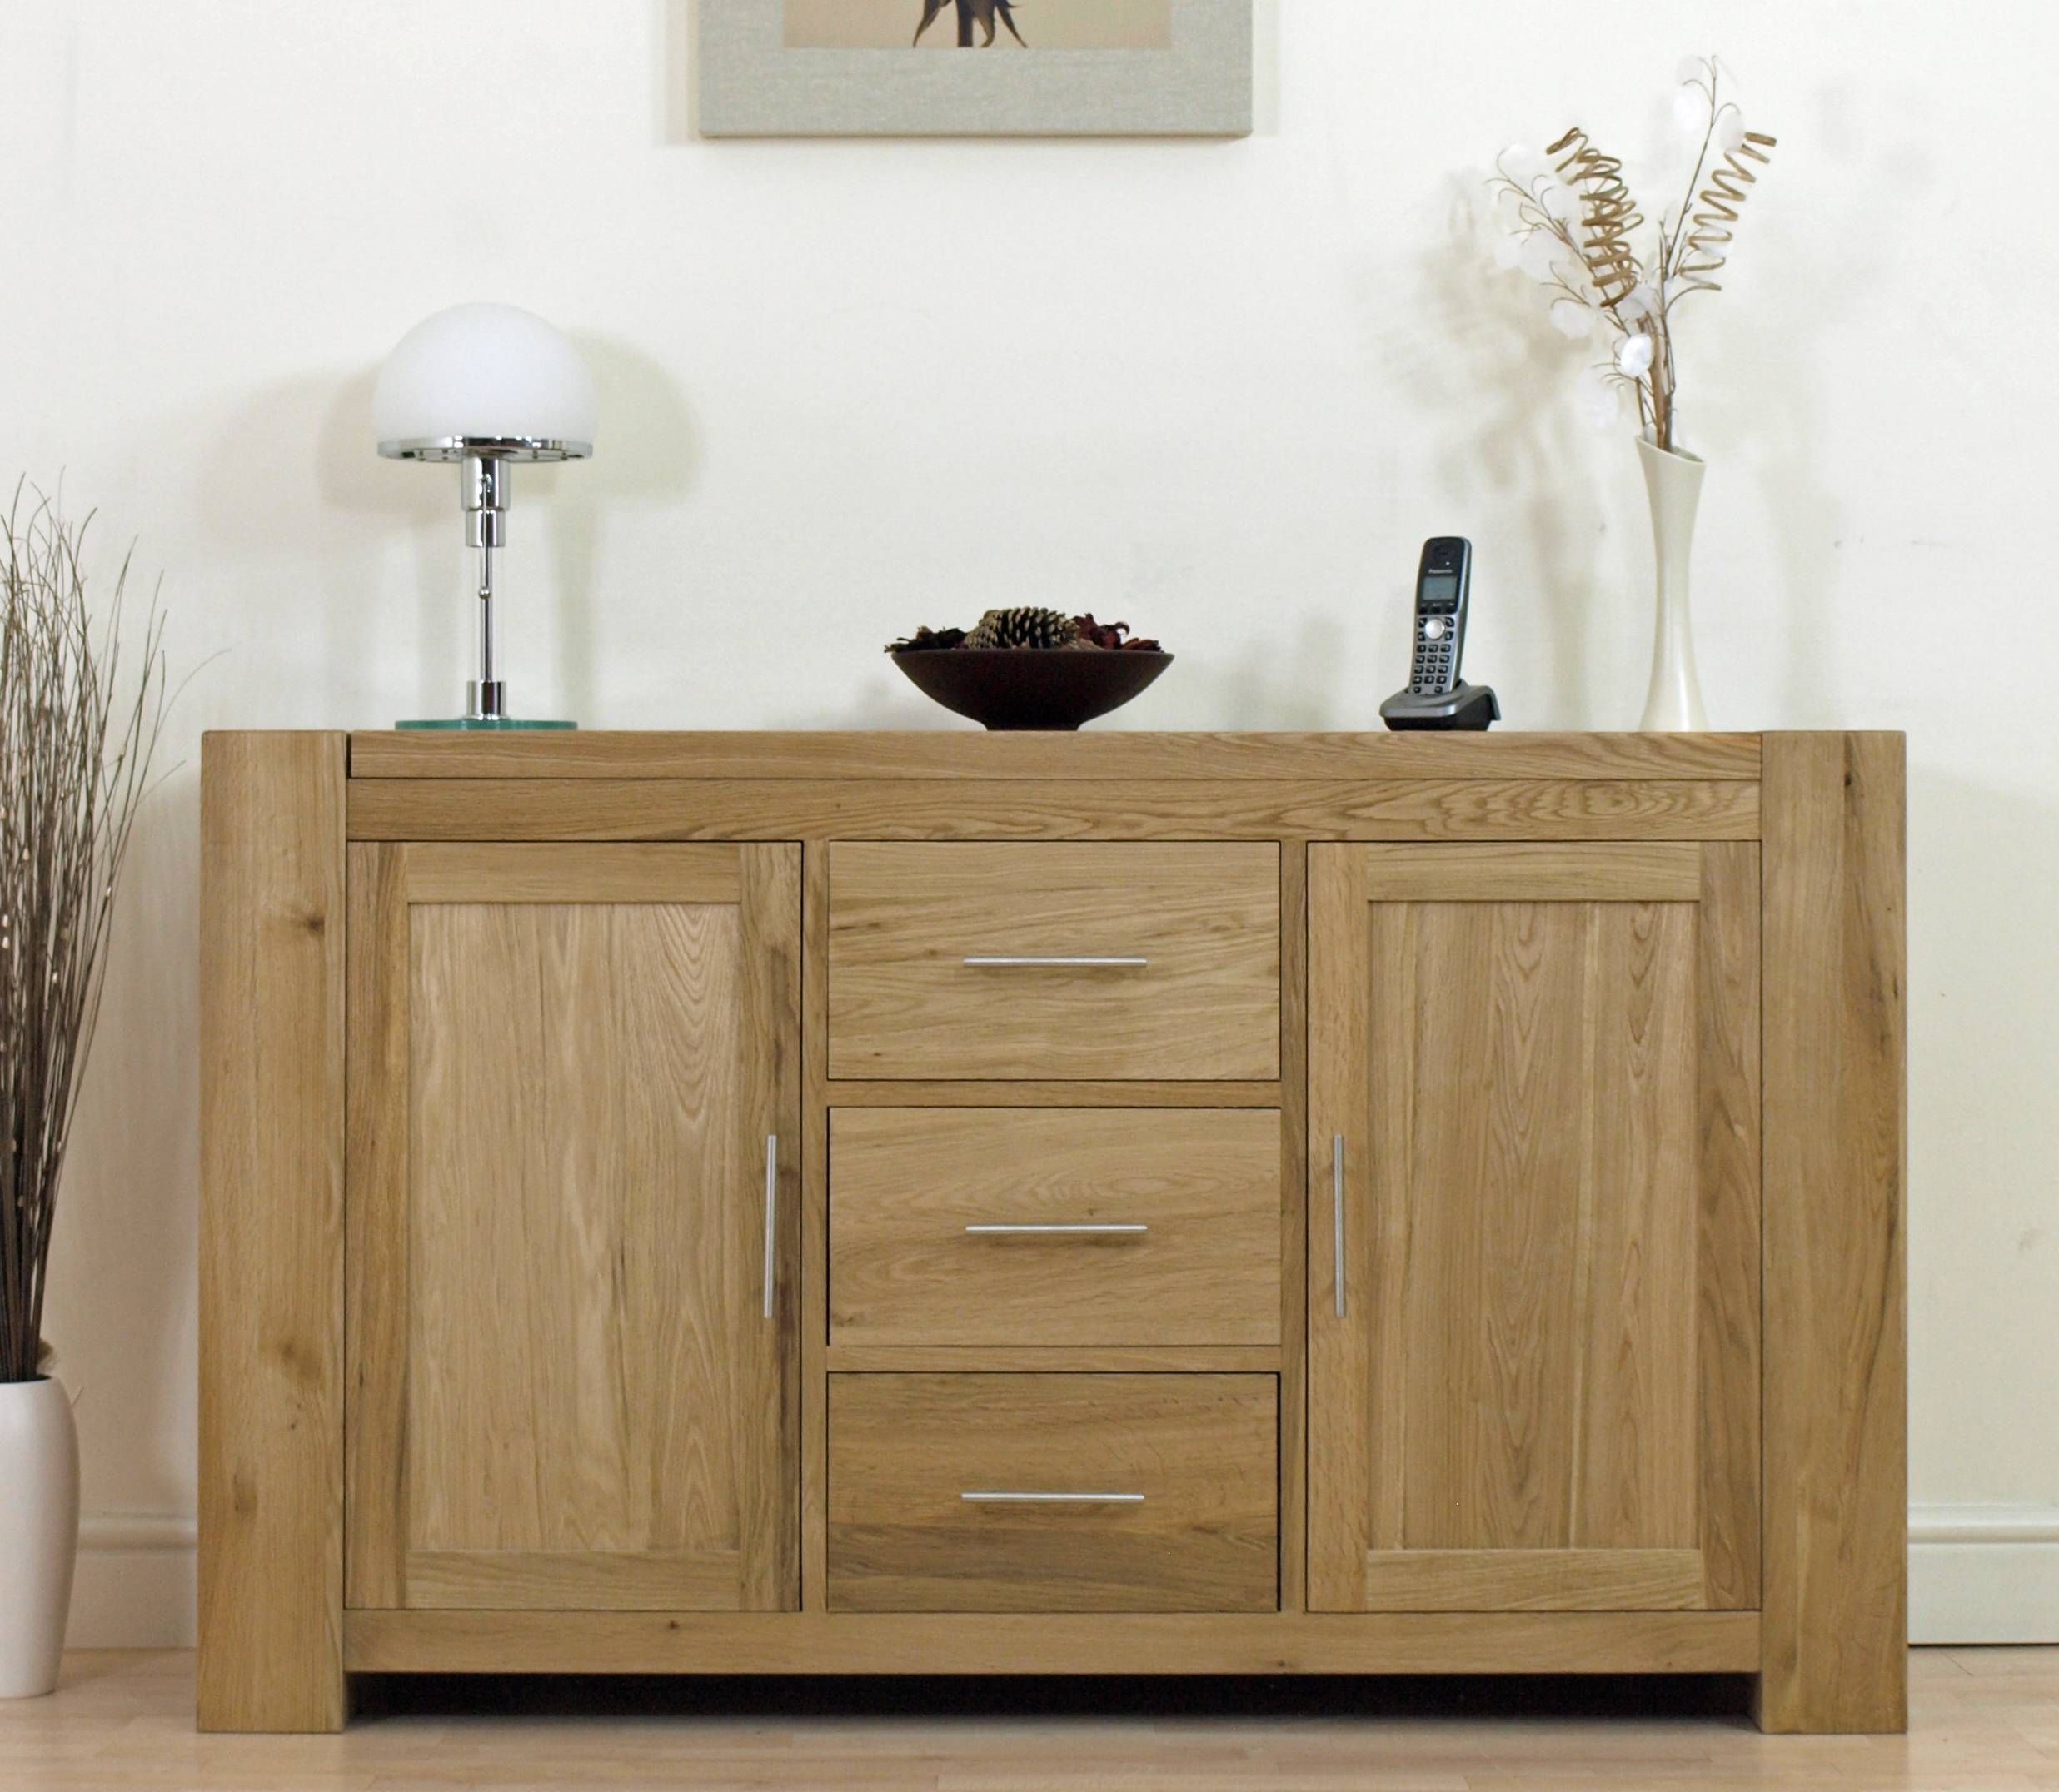 Solid Oak Sideboard Is Your First Choice Living Room Furniture – Hgnv With Regard To Sideboards Living Room (Photo 9 of 20)